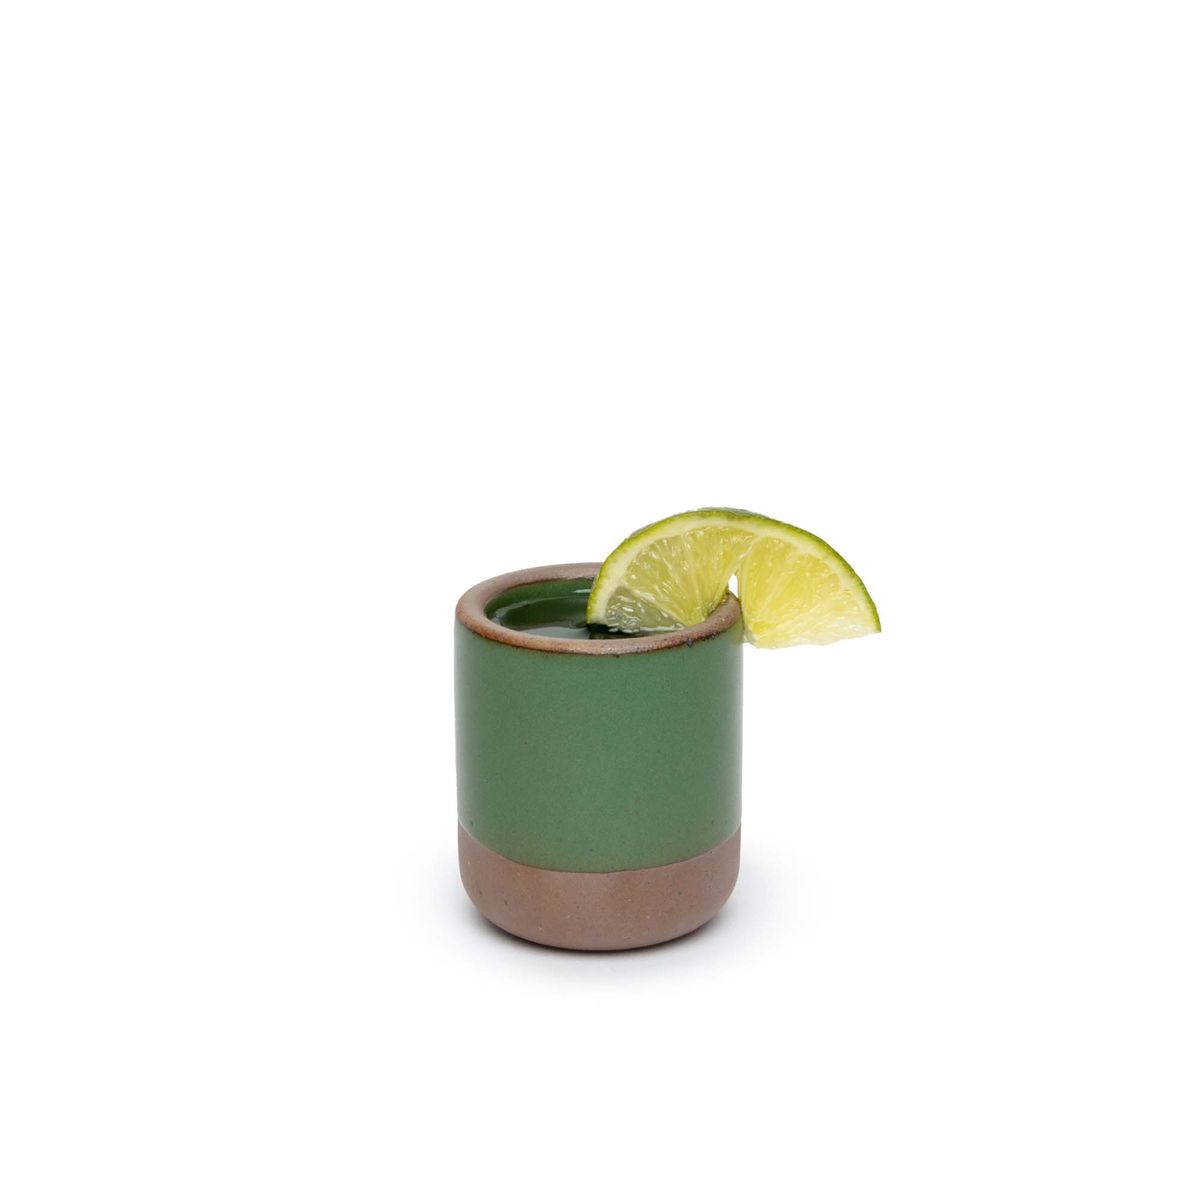 A small, short ceramic mug cup in a deep, verdant green color featuring iron speckles and unglazed rim and bottom base, filled with a drink and topped with a lime slice